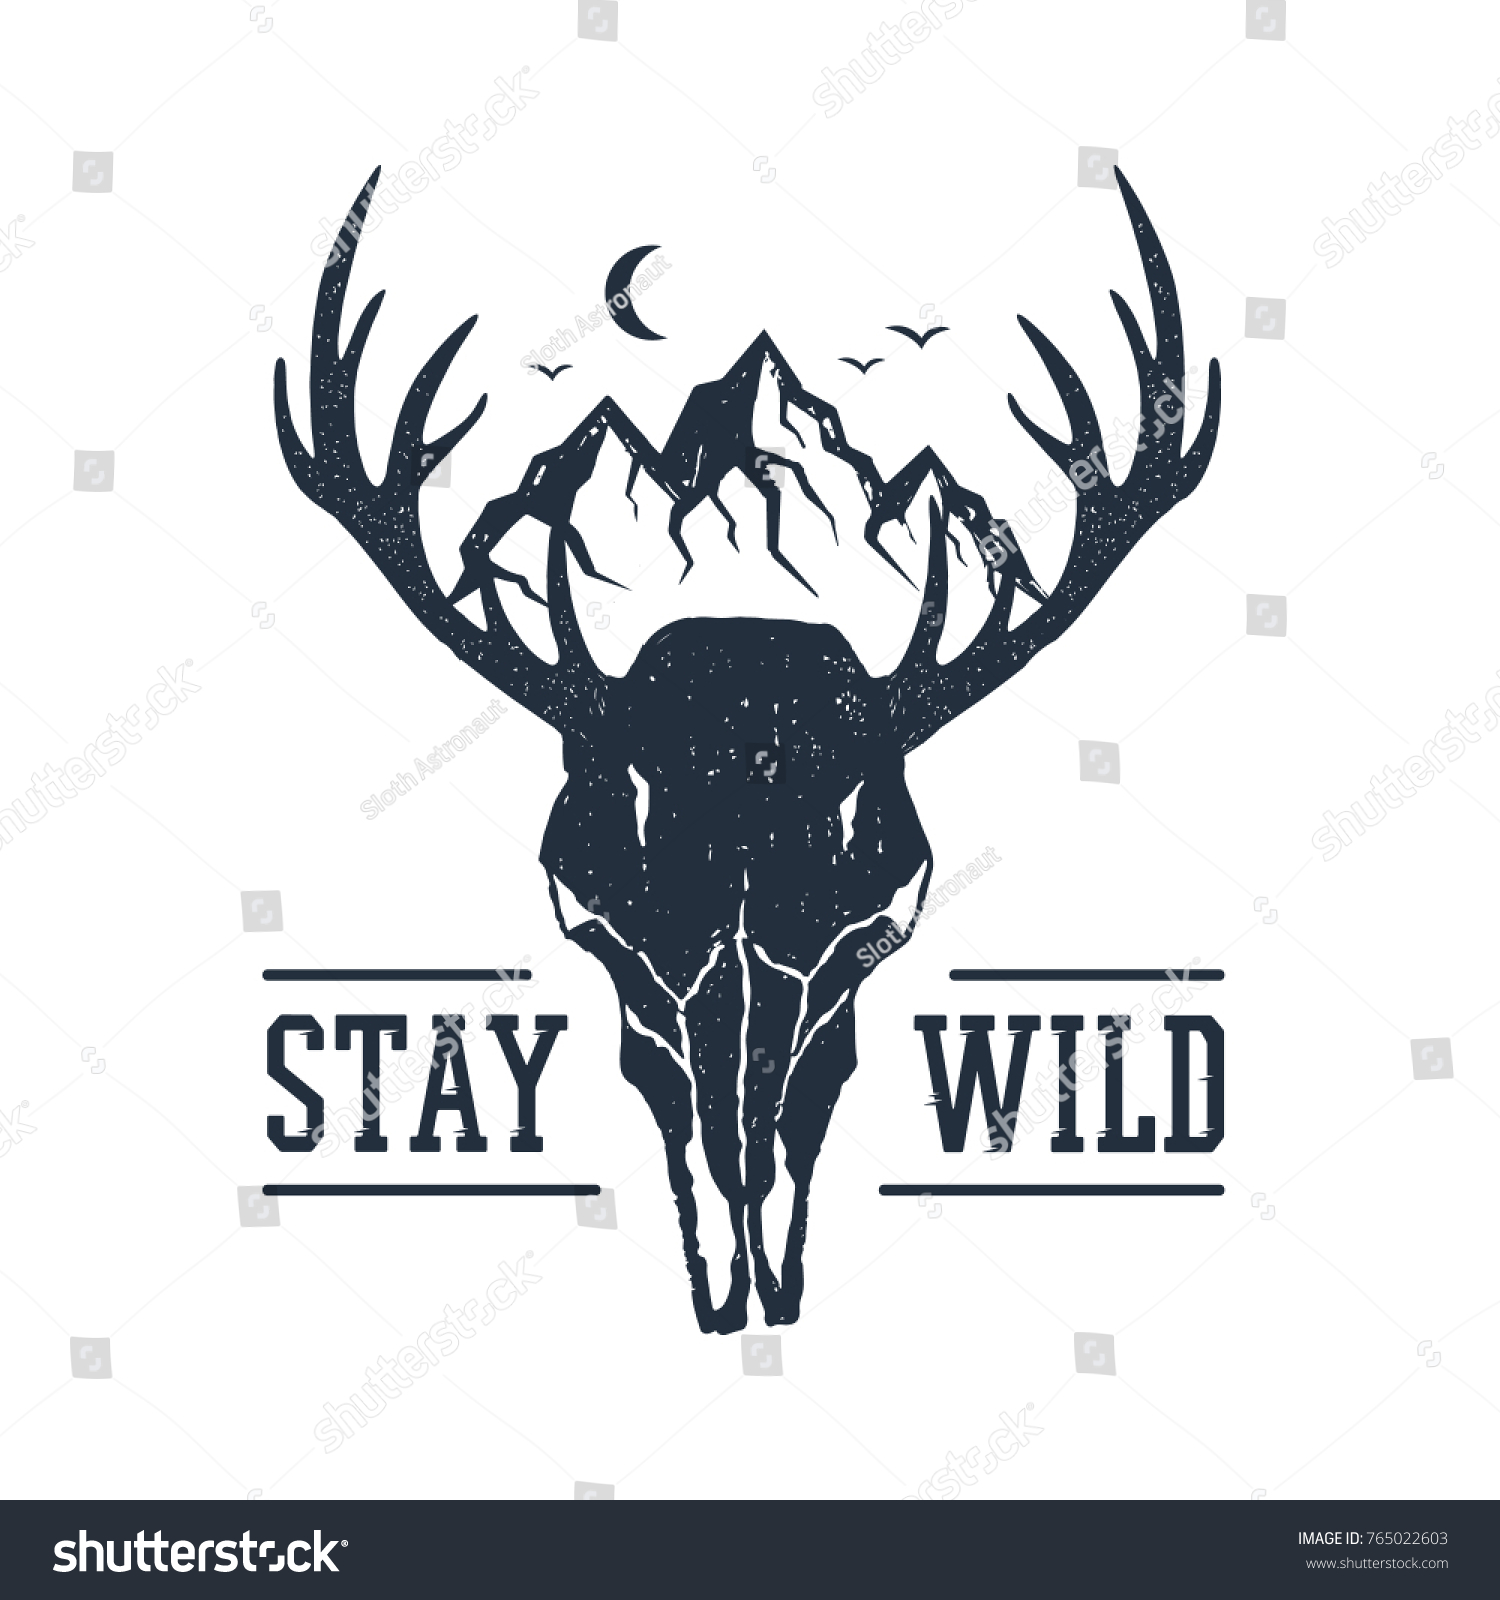 stock-vector-hand-drawn-inspirational-label-with-mountains-and-deer-skull-textured-vector-illustrations-and-765022603.jpg